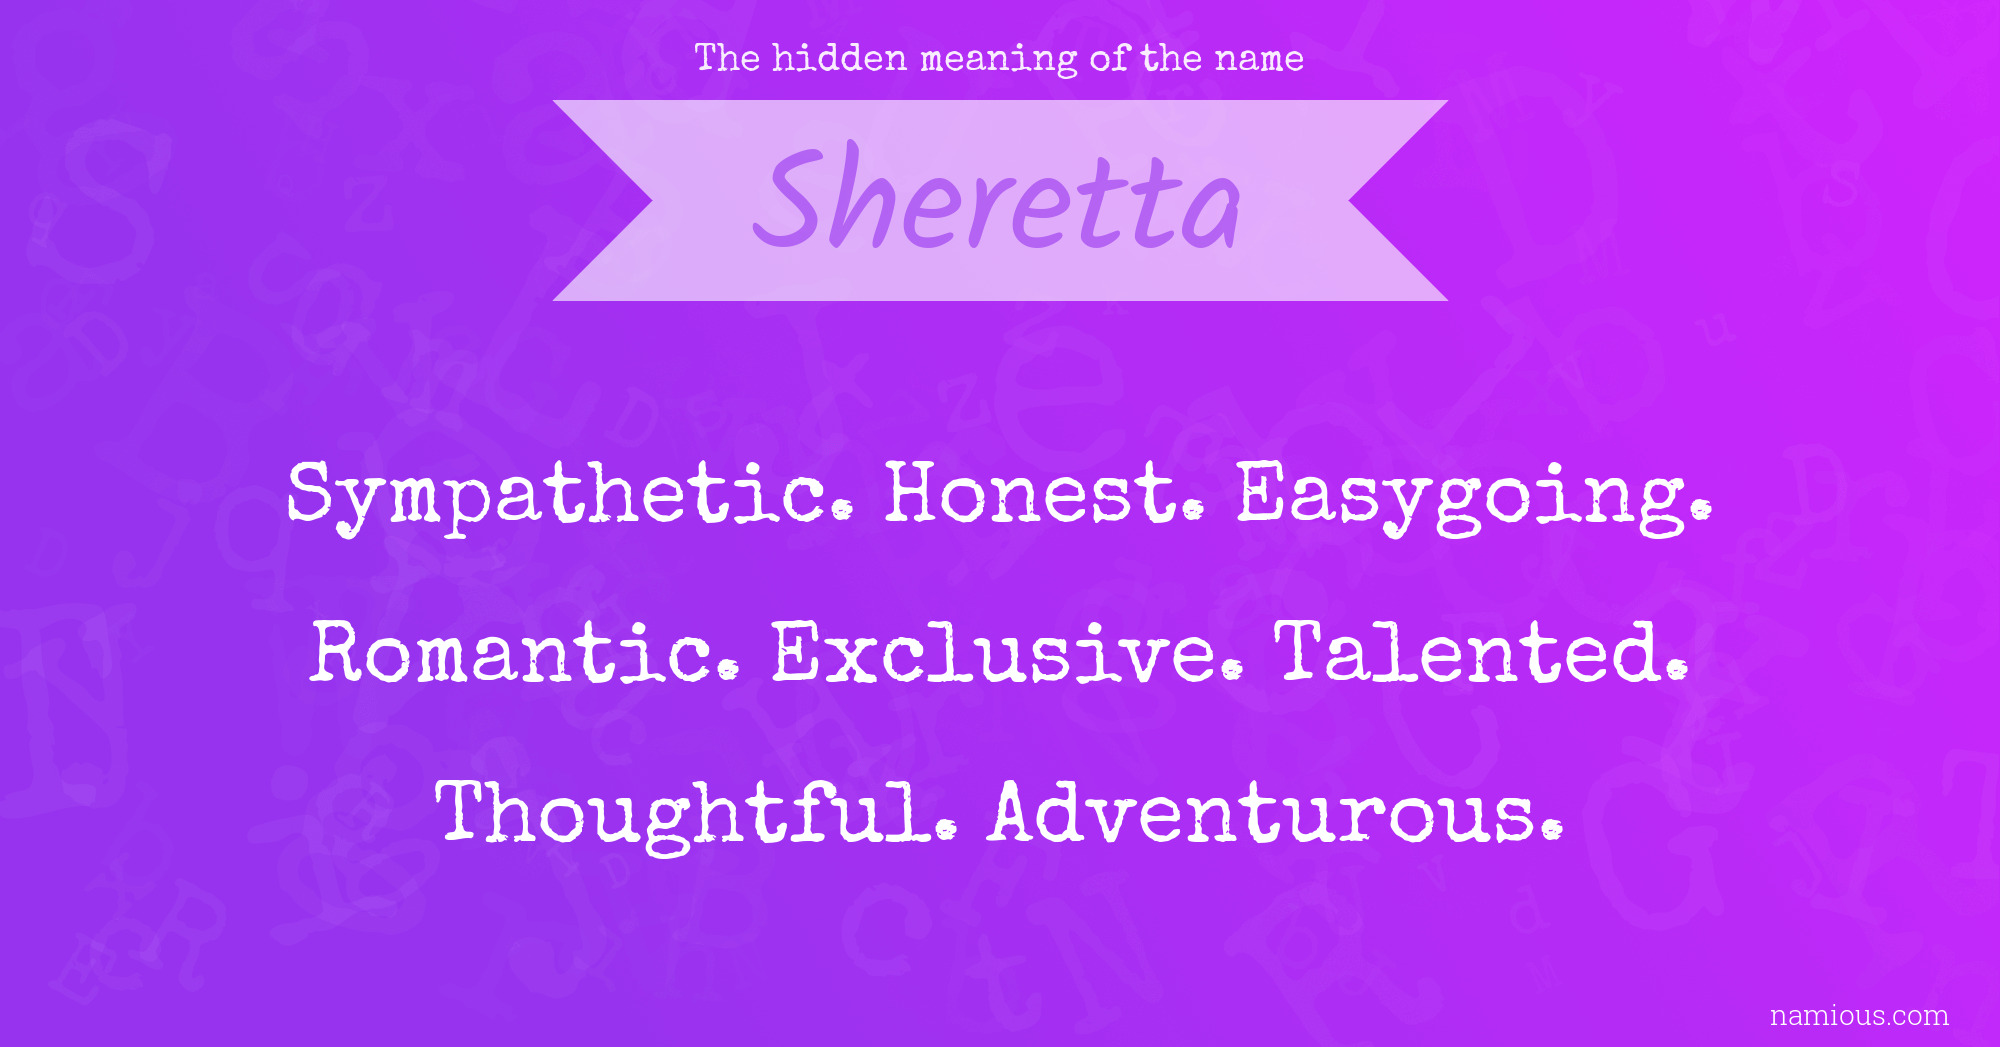 The hidden meaning of the name Sheretta